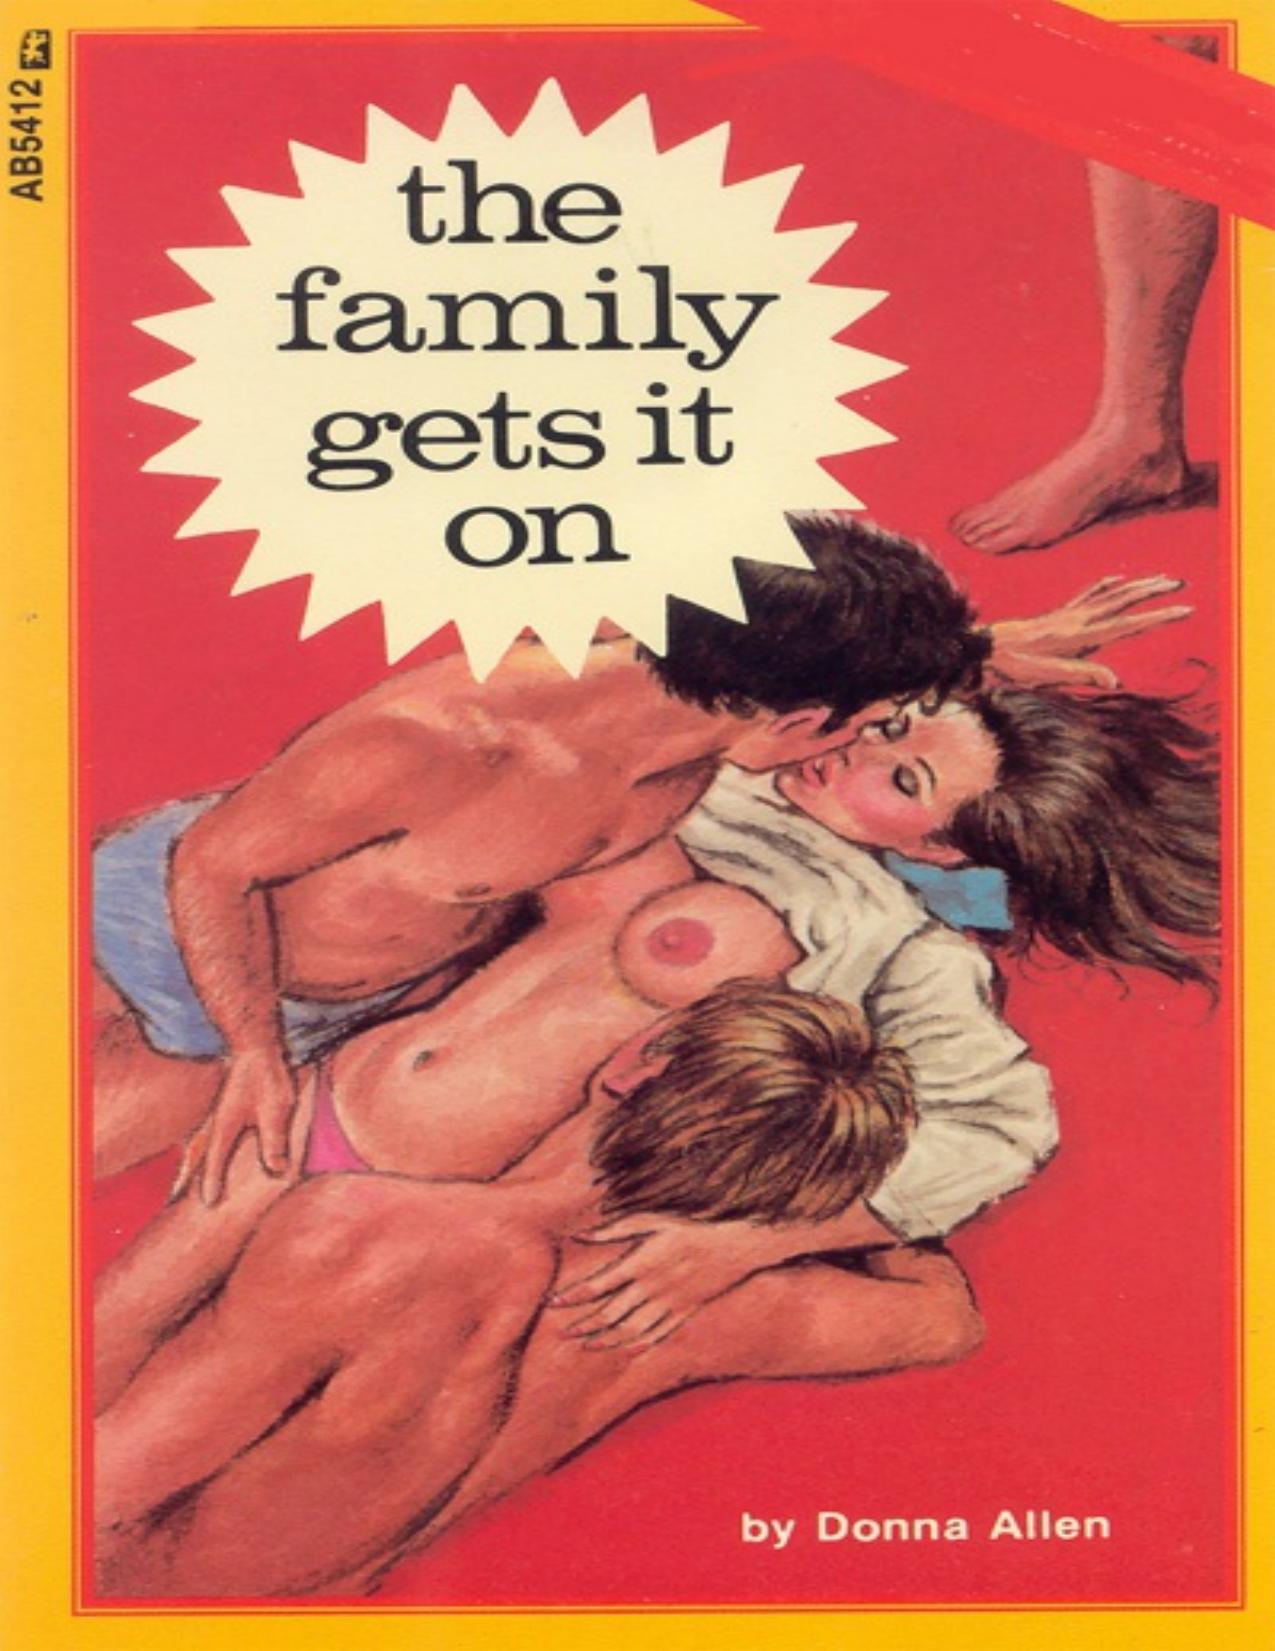 The Family Gets It On by Donna Allen